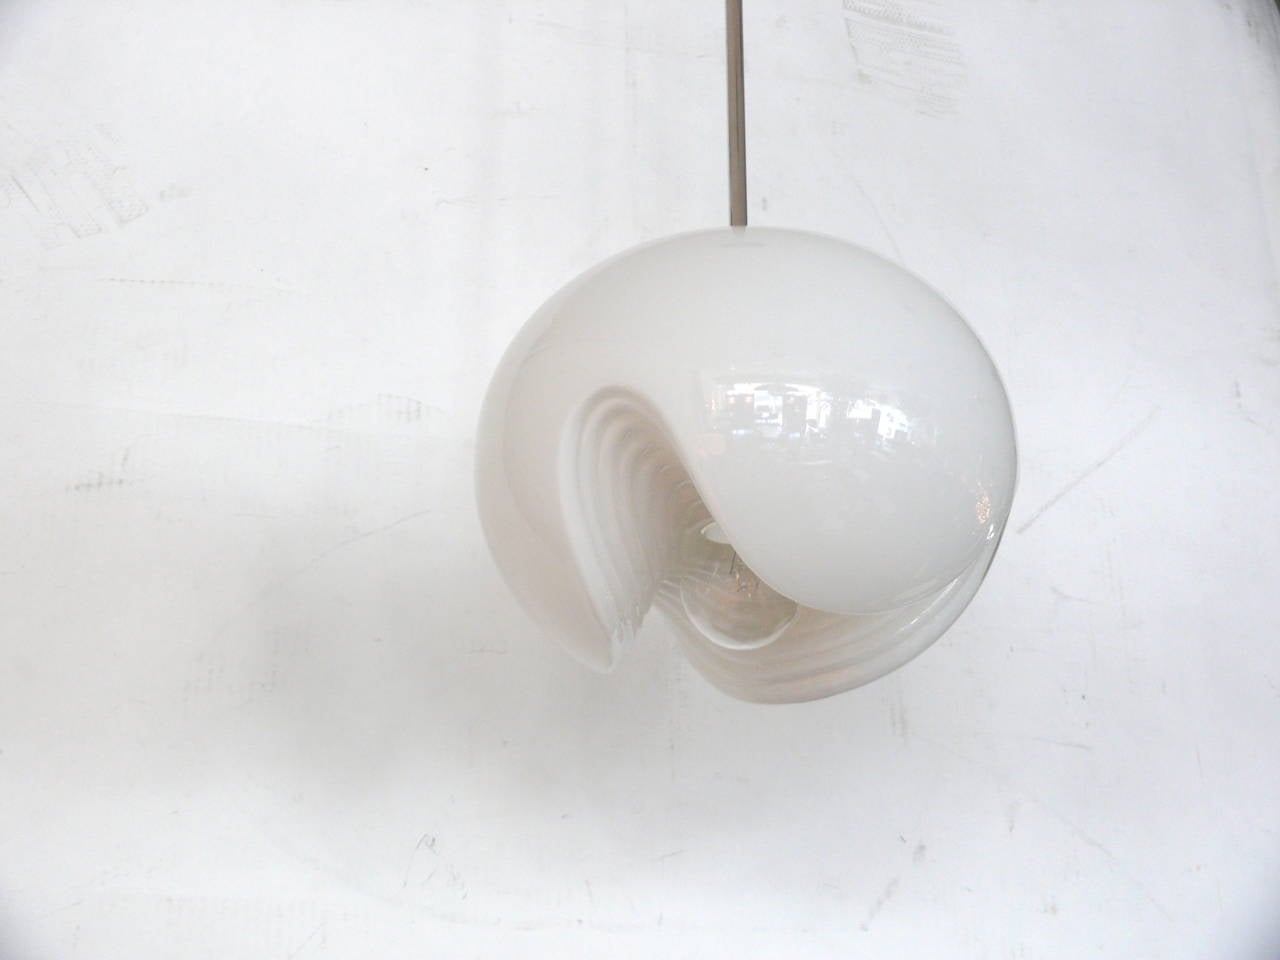 Elegant biomorphic pendant light by Koch and Lowy. Opaque, hand blown glass with nickel hardware. Newly rewired. Two available. Priced individually. Larger size also available.